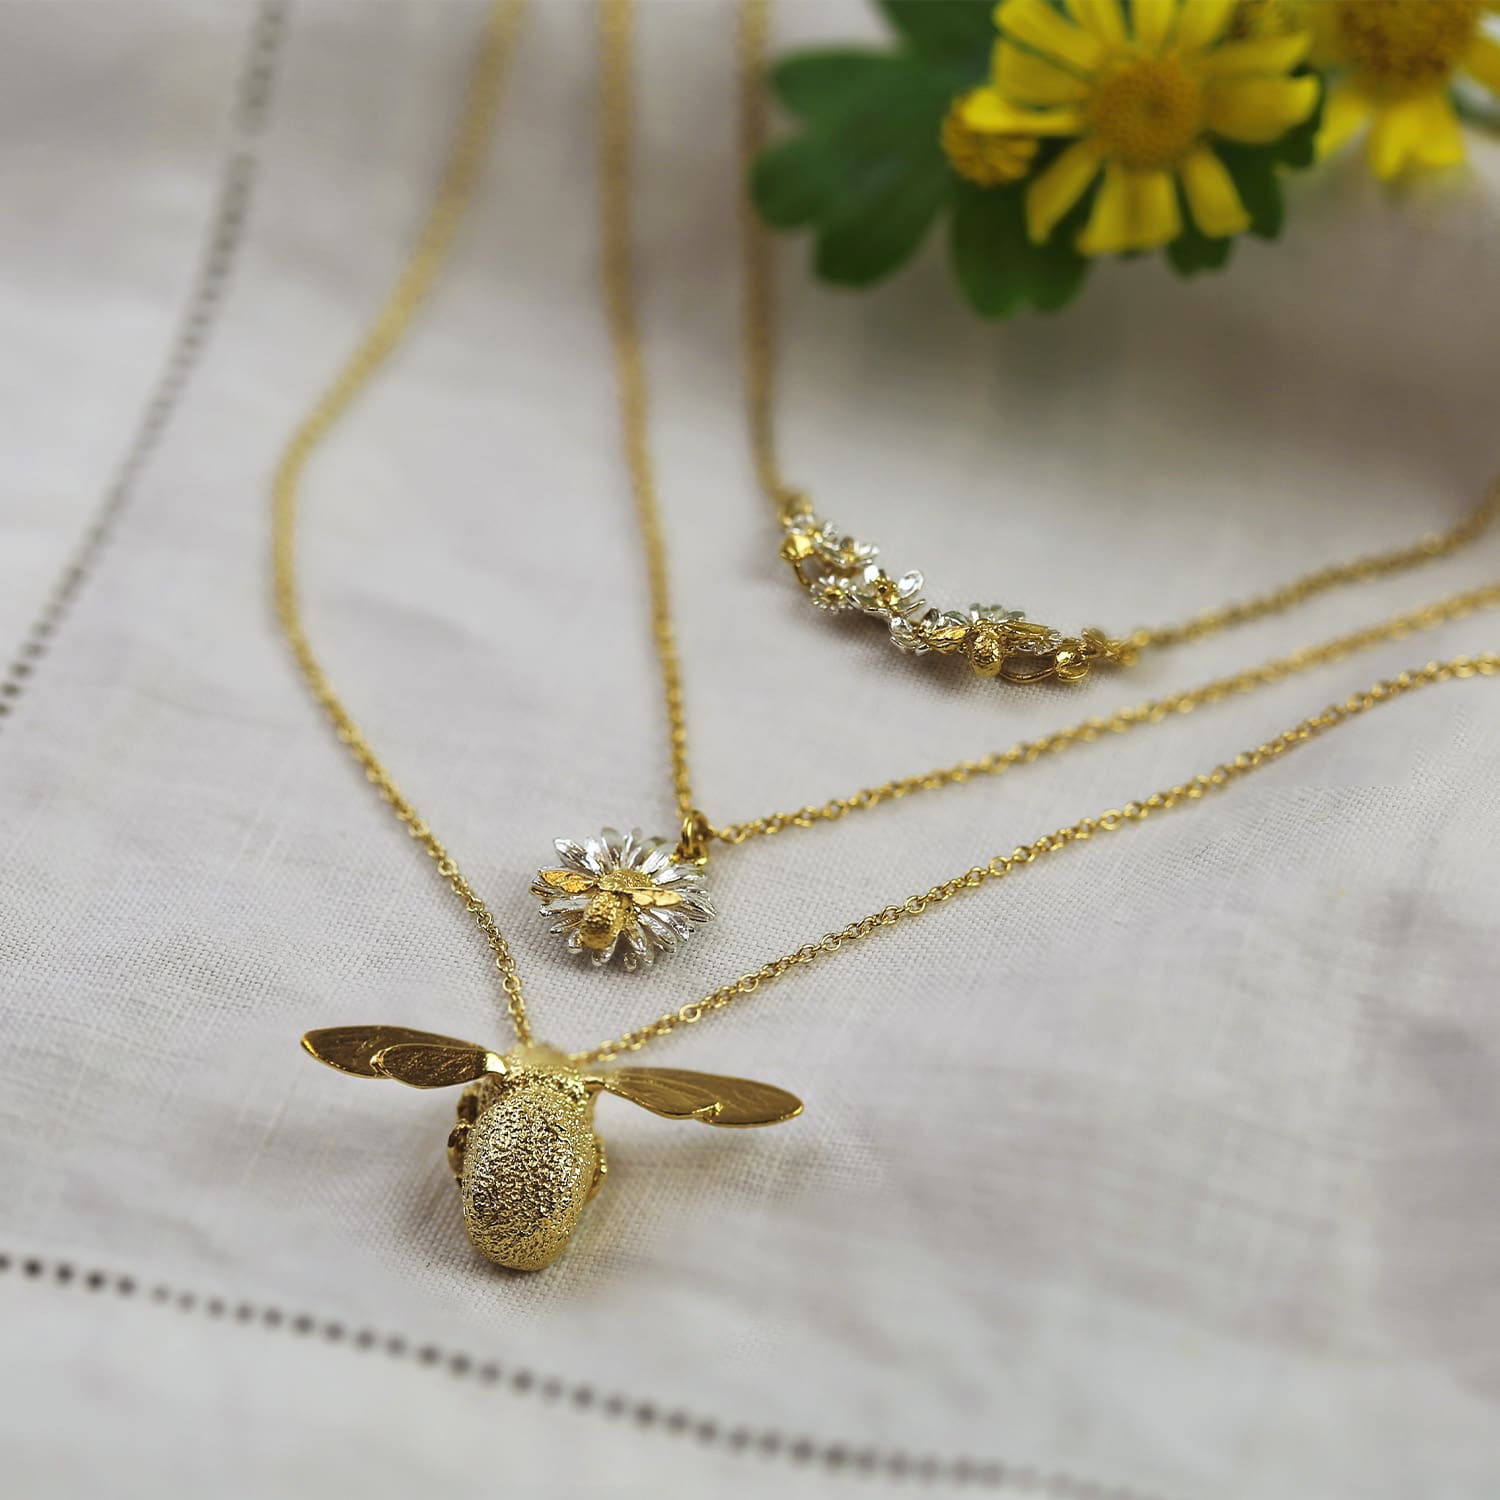  iconic alex monroe original gold plated bumblebee necklace and a garden gathering necklaces 